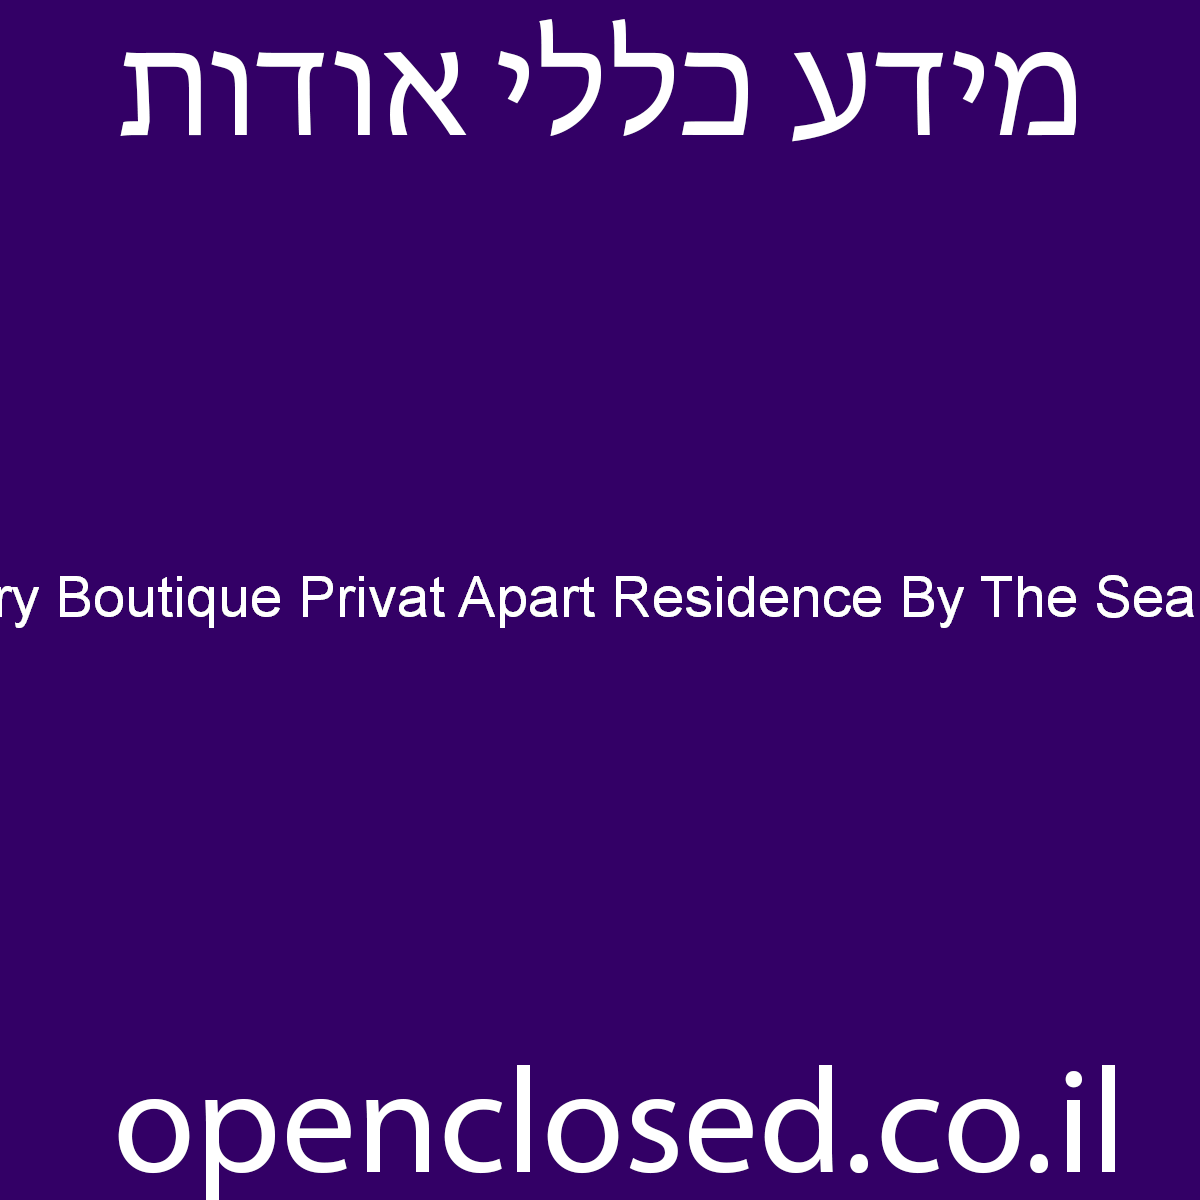 De Golf Luxury Boutique Privat Apart Residence By The Sea